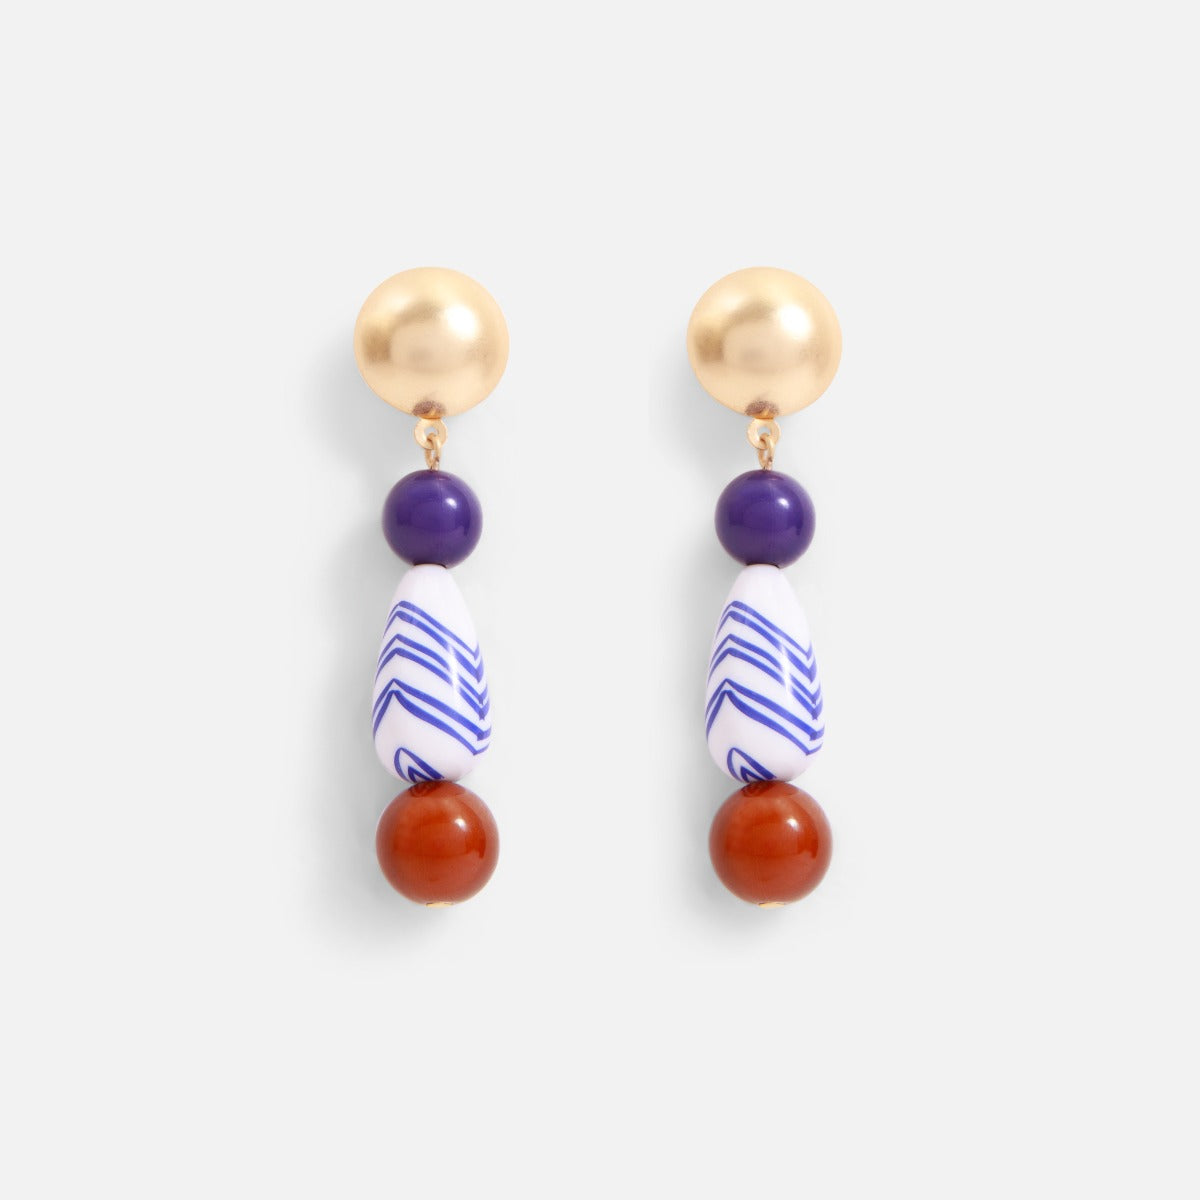 Long earrings with white, blue and red beads